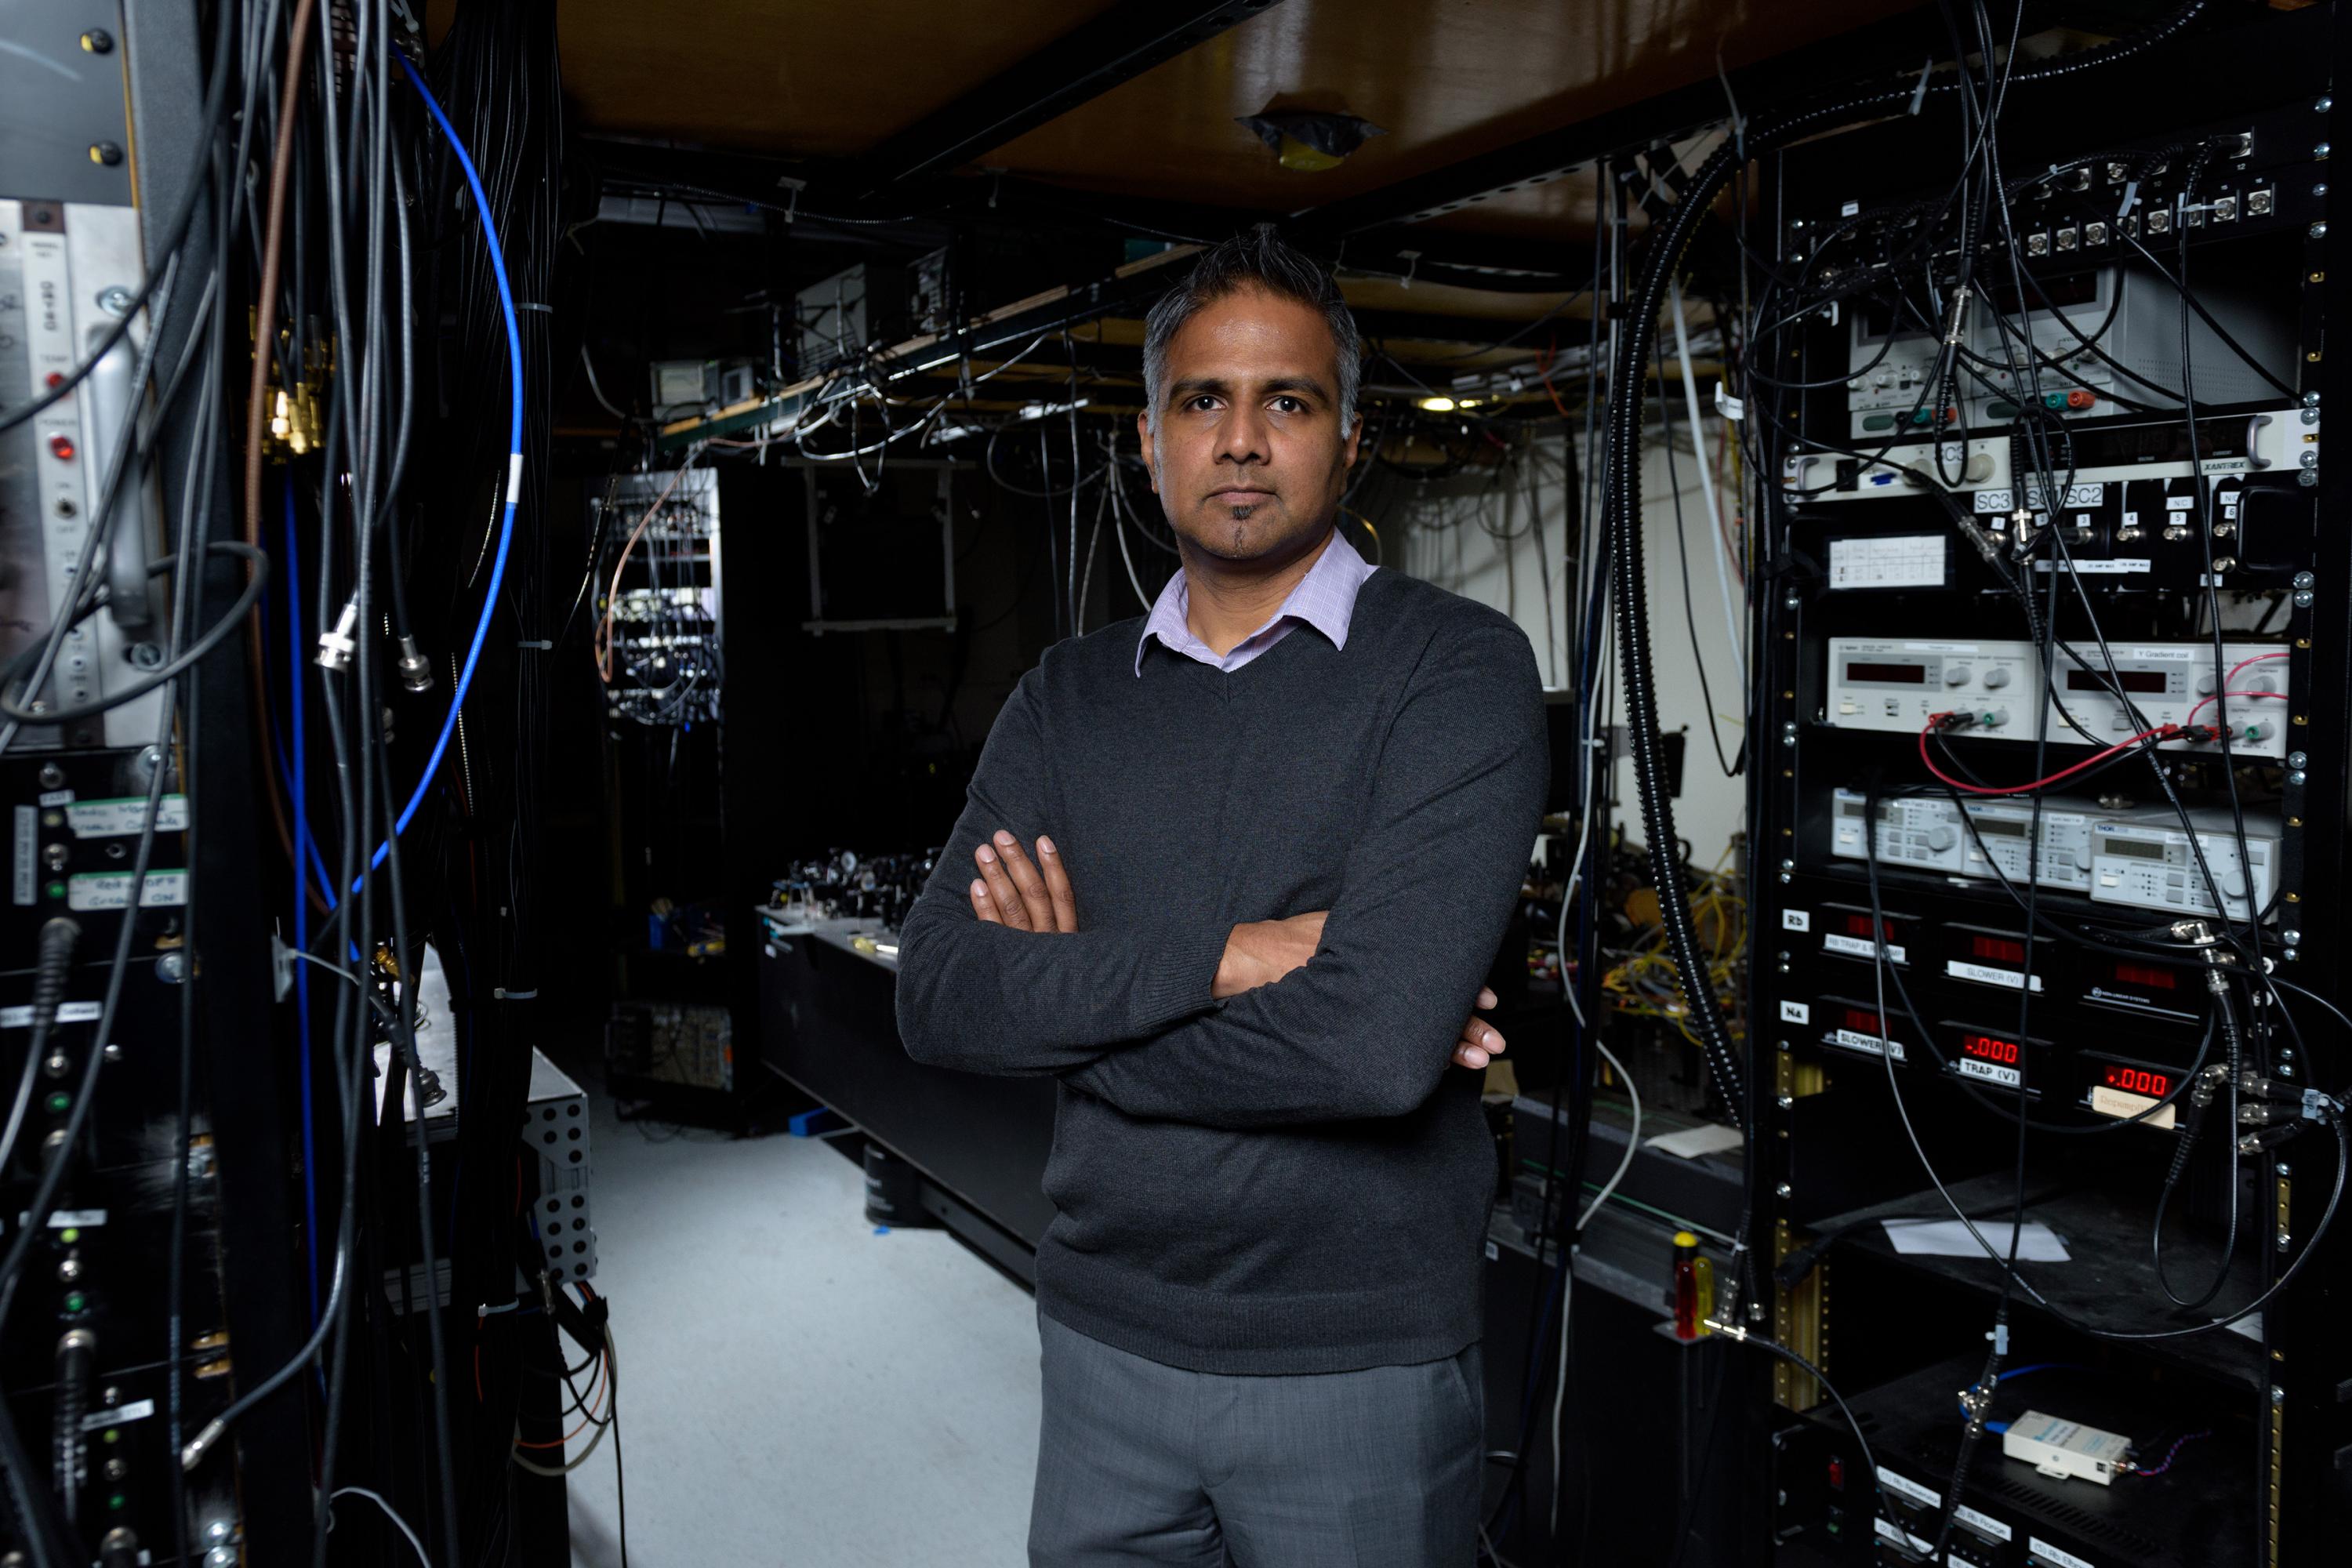 Chandra Raman, an associate professor in the Georgia Tech School of Physics, is shown in his laboratory with equipment used to study Bose-Einstein condensates. (Credit: Rob Felt, Georgia Tech).